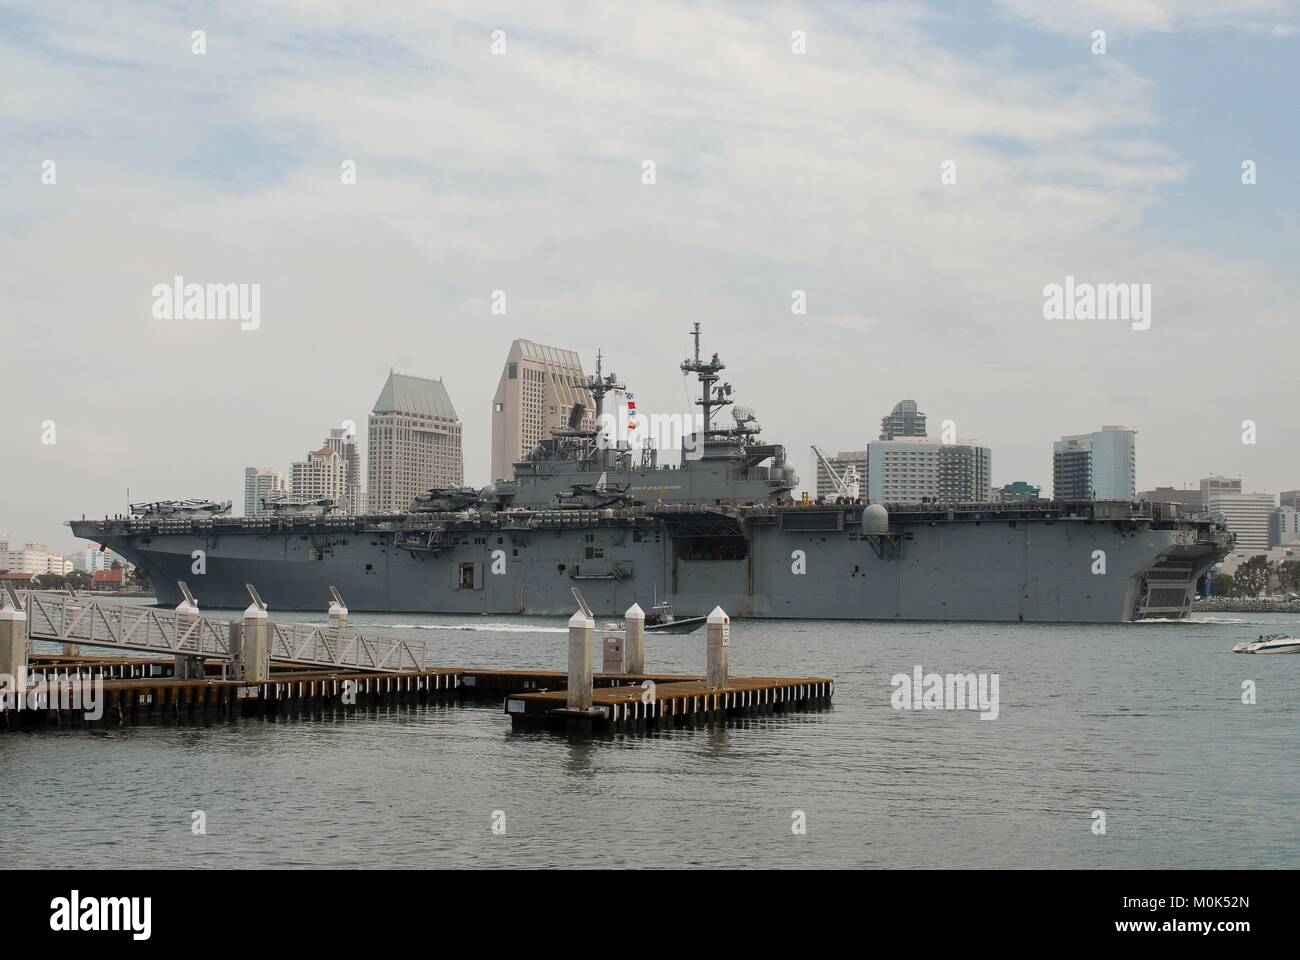 The U.S. Navy Wasp-class amphibious assault ship USS Boxer transits through the San Diego Bay July 26, 2013 in San Diego, California. Stock Photo